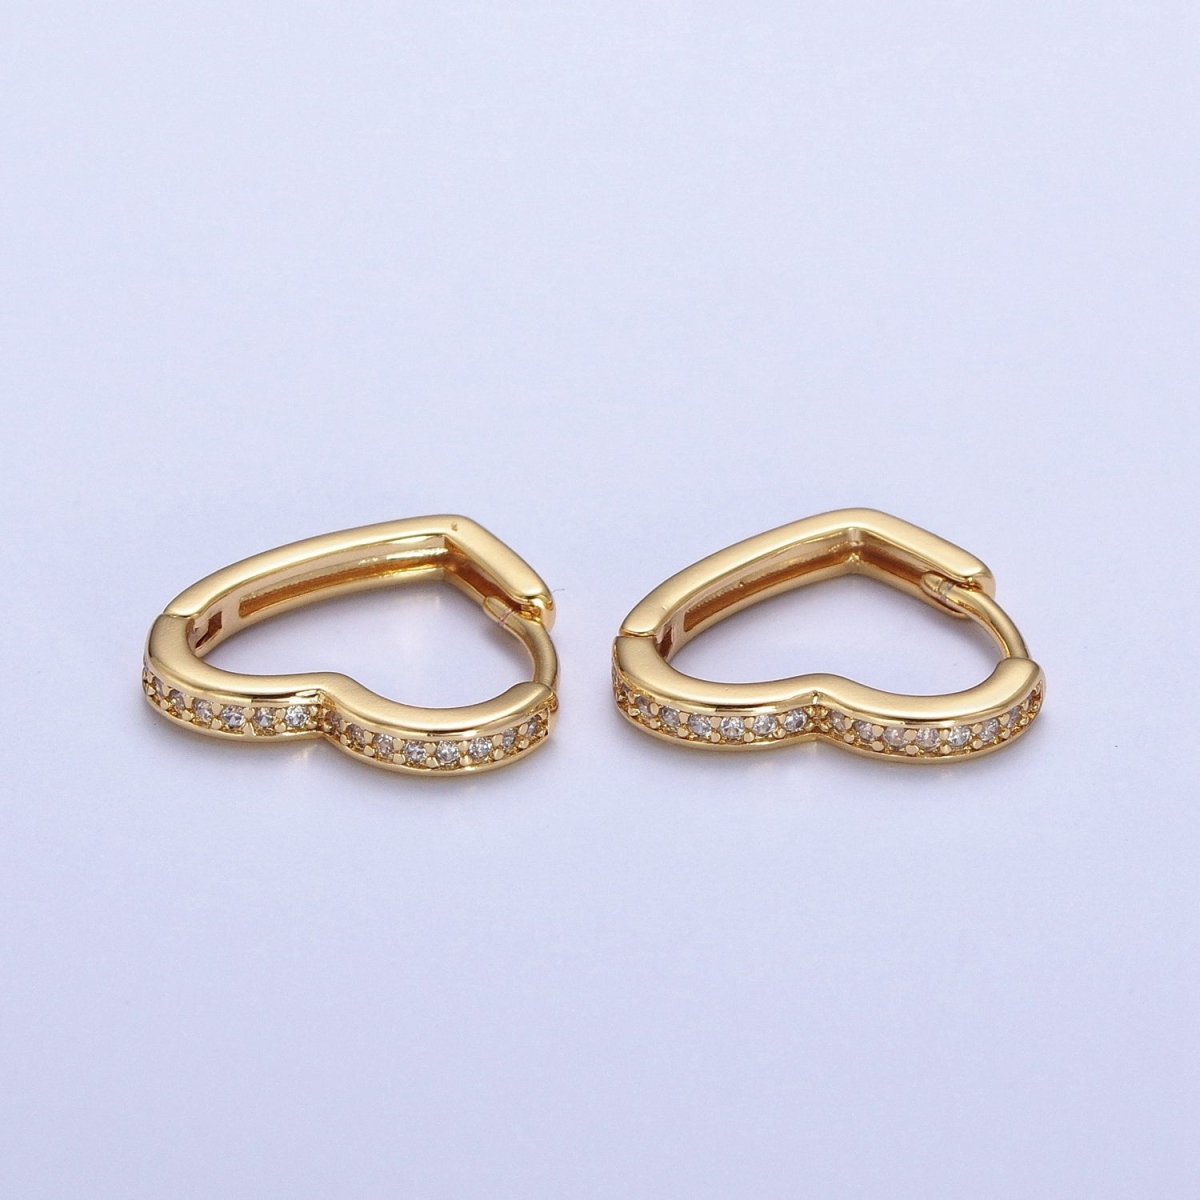 24K Gold Filled Micro Pave Heart Love Huggie Hoop Earrings Jewelry Gift For Valentine | T-027 T-028 X-840 - DLUXCA